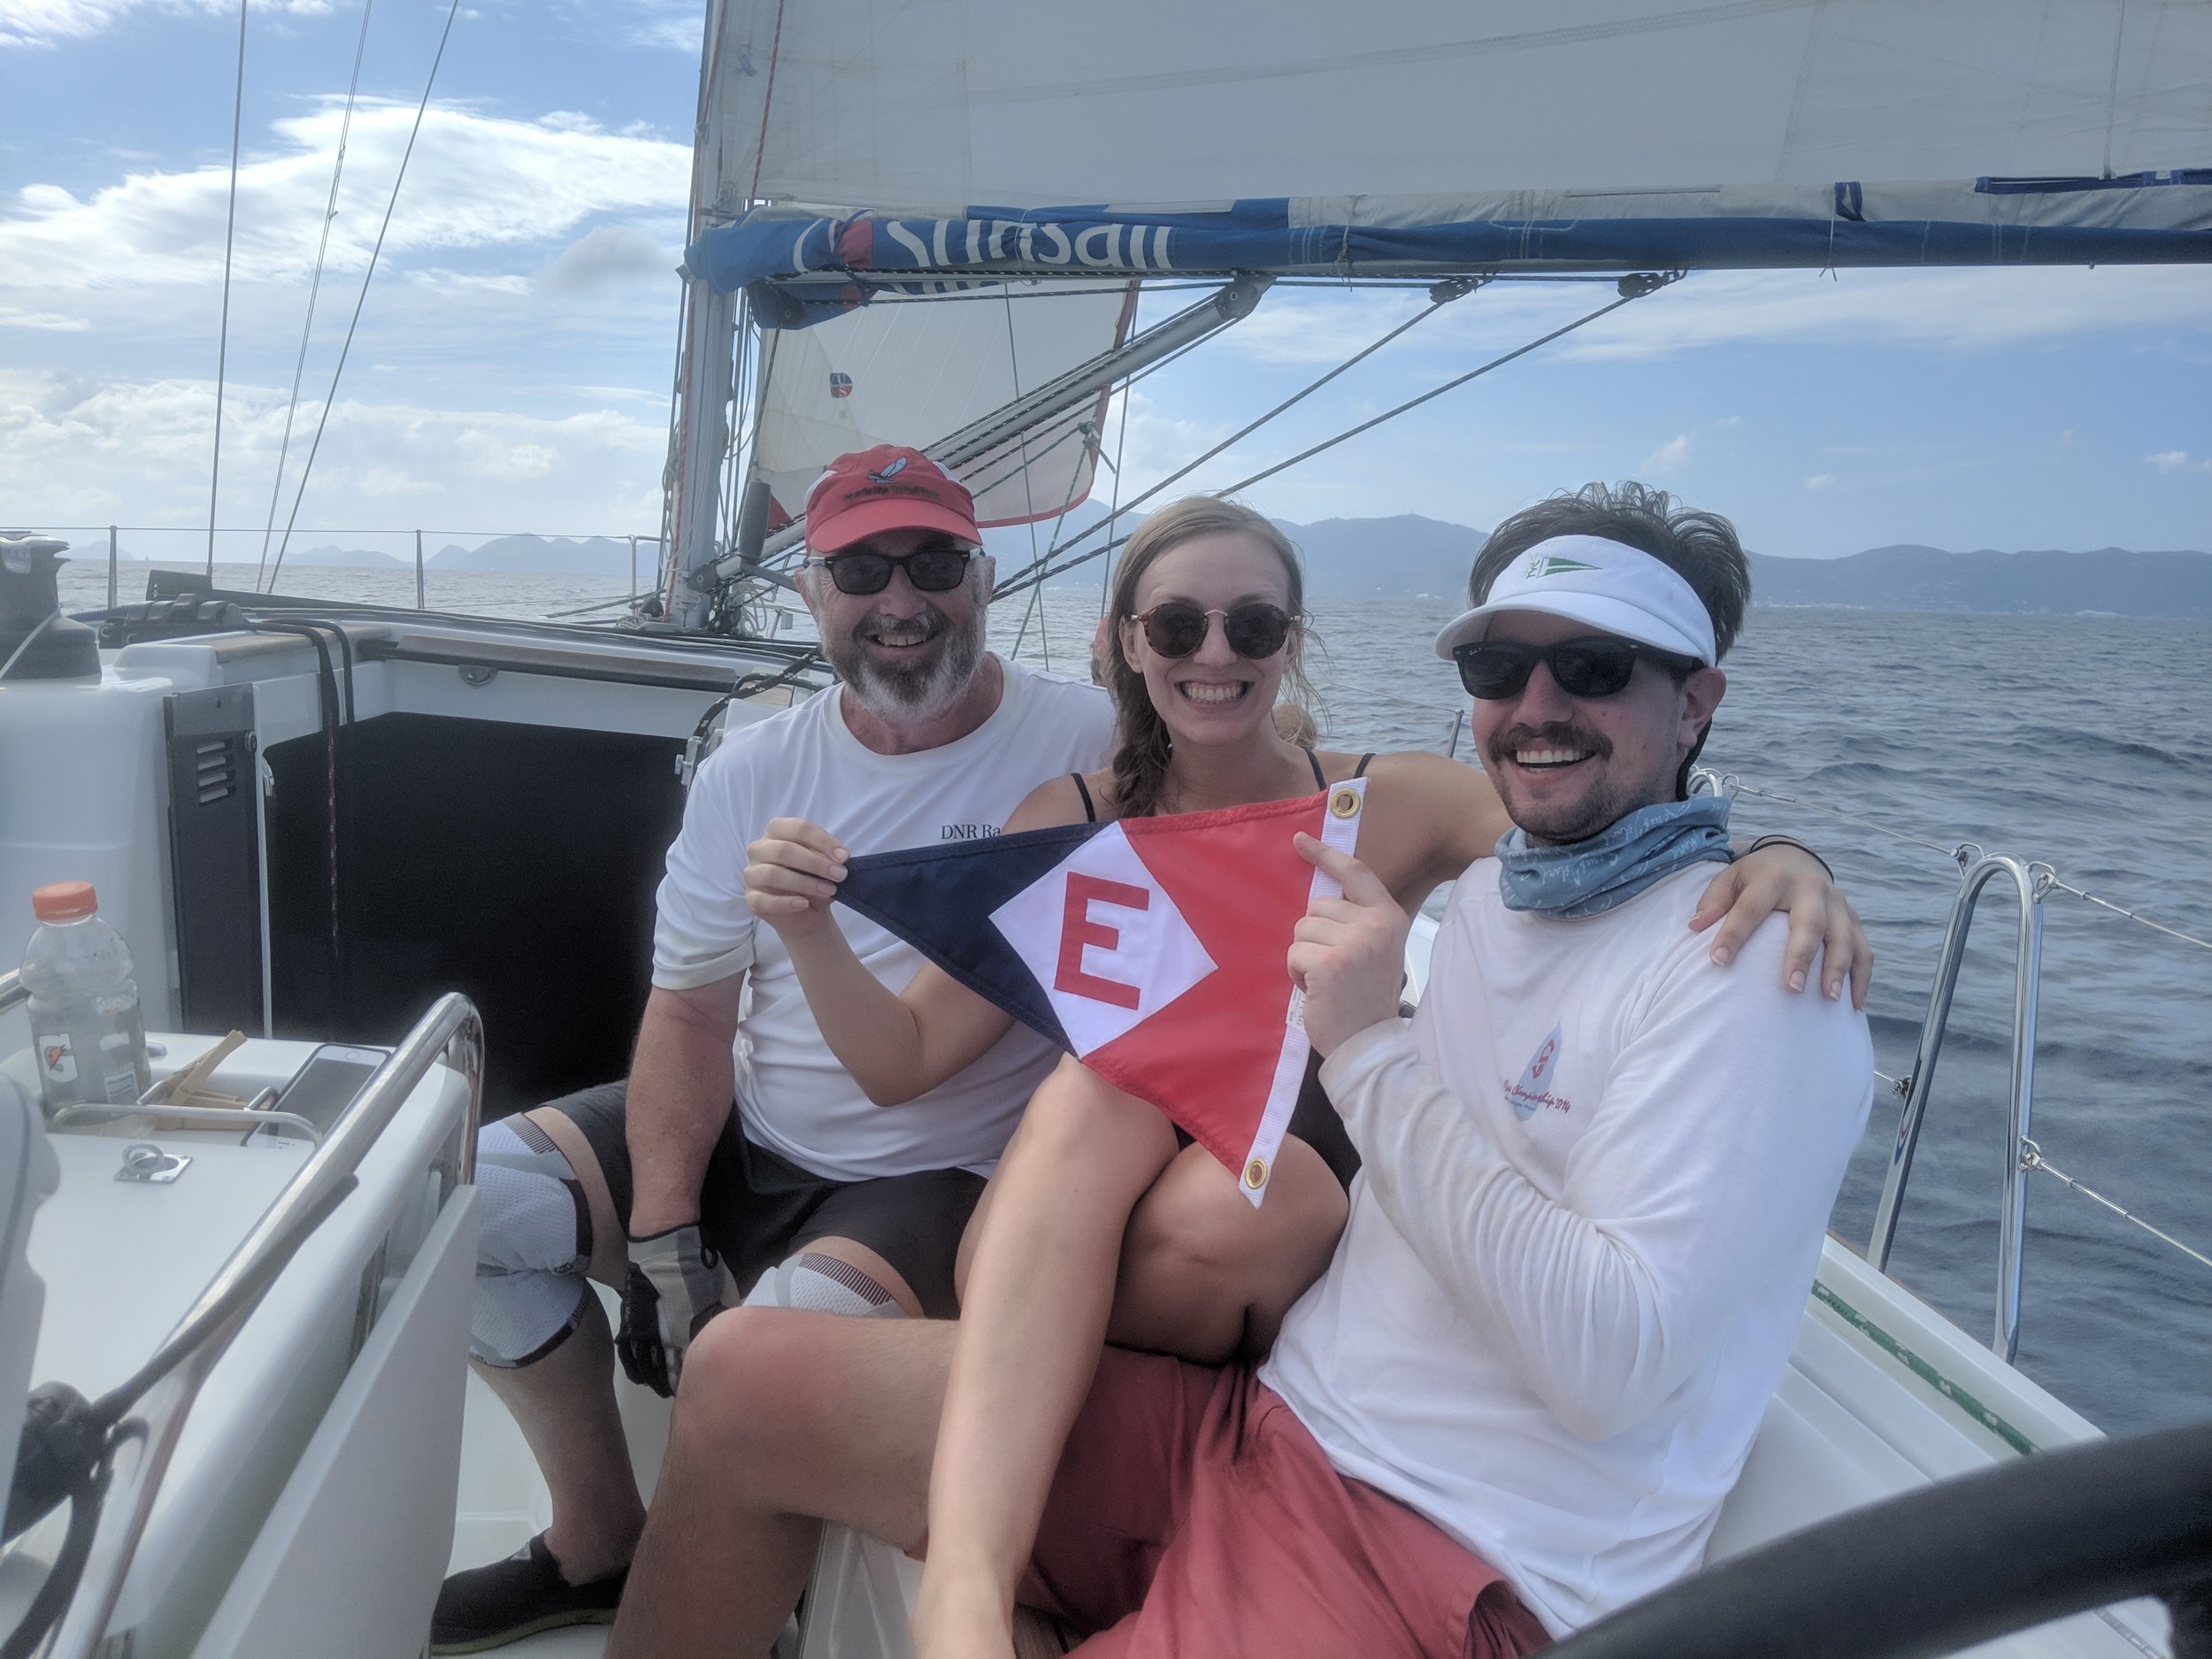  Chris, Kimi, and Jac, members of the DNR Racing team, take a moment from training for the Spring Regatta in the British Virgin Islands to hoist the EYC burgee 